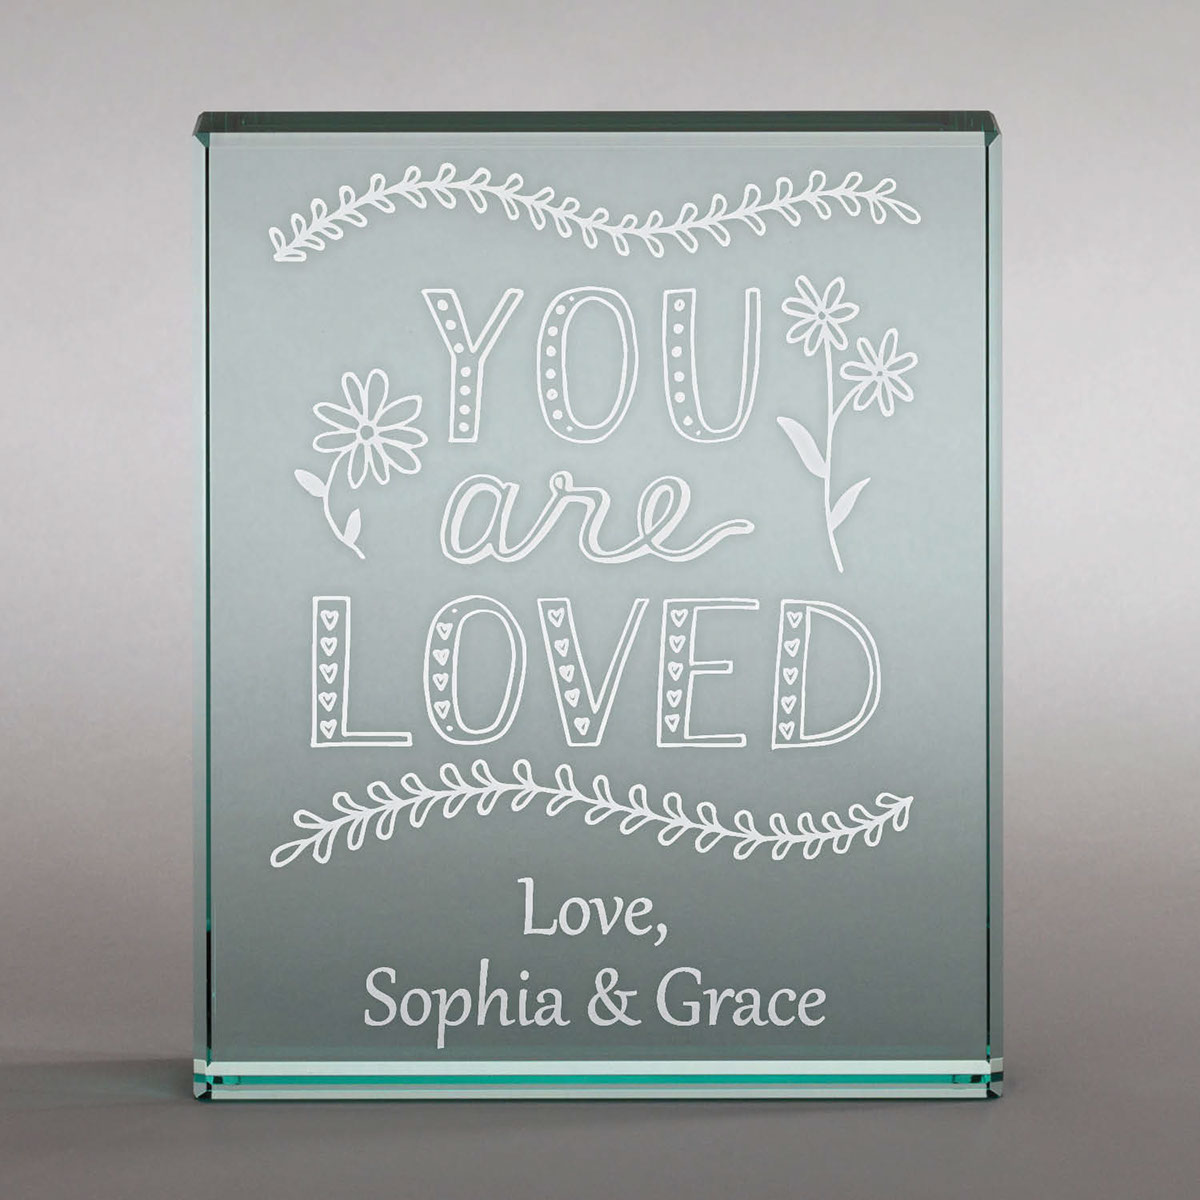 HAND LETTERING lettering personalized products Custom Personalization Solutions personalization gifts Father's Day Gifts home decor cps Personalized Planet Hand Typography hand illustrated Custom Personalization